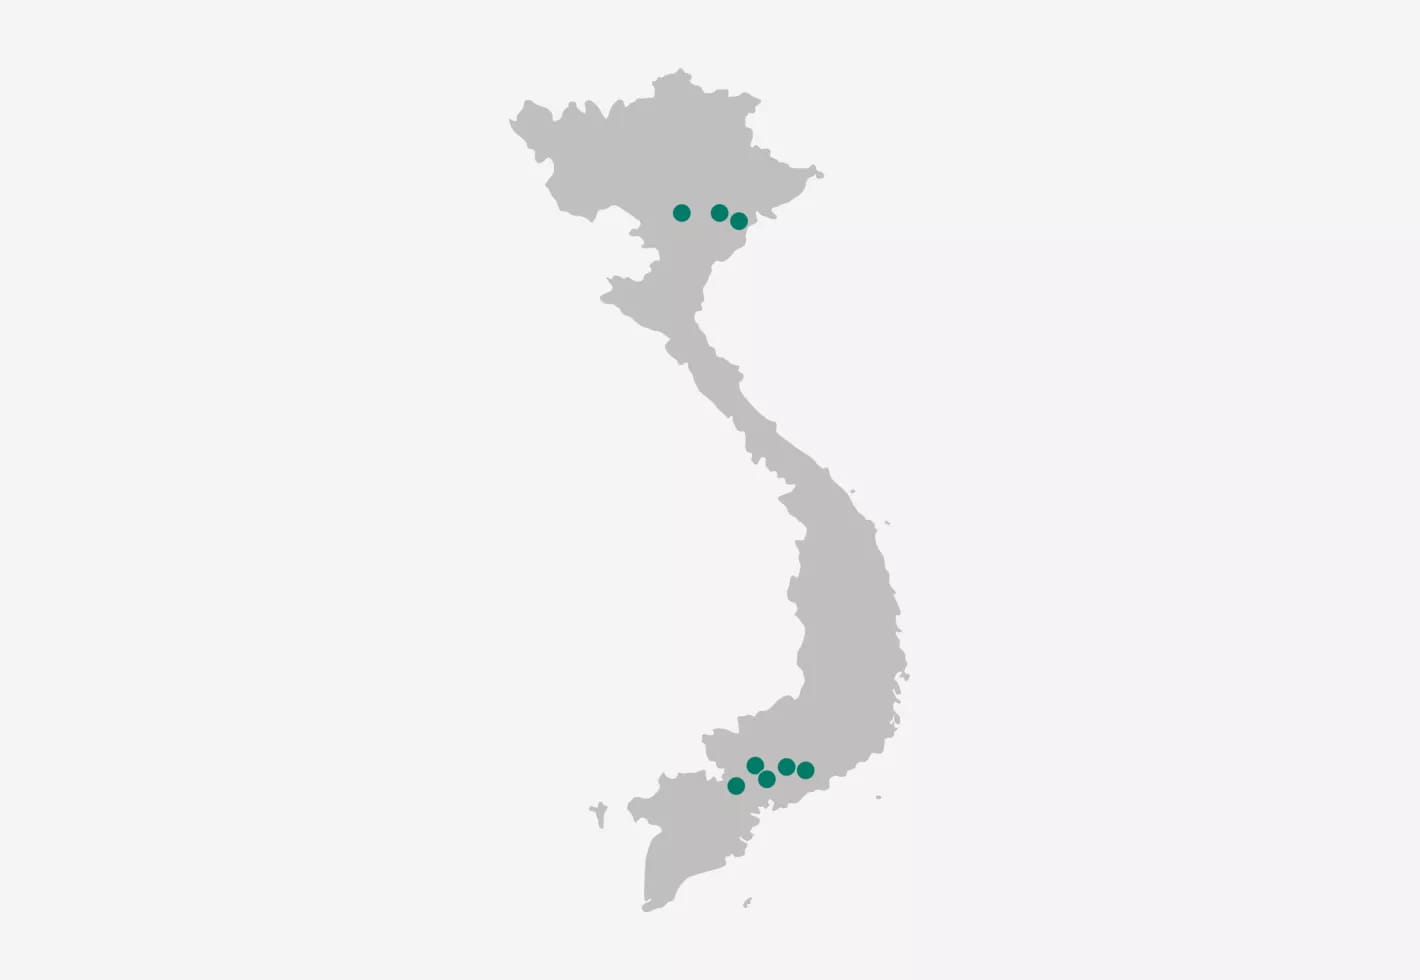 Our presence in Vietnam